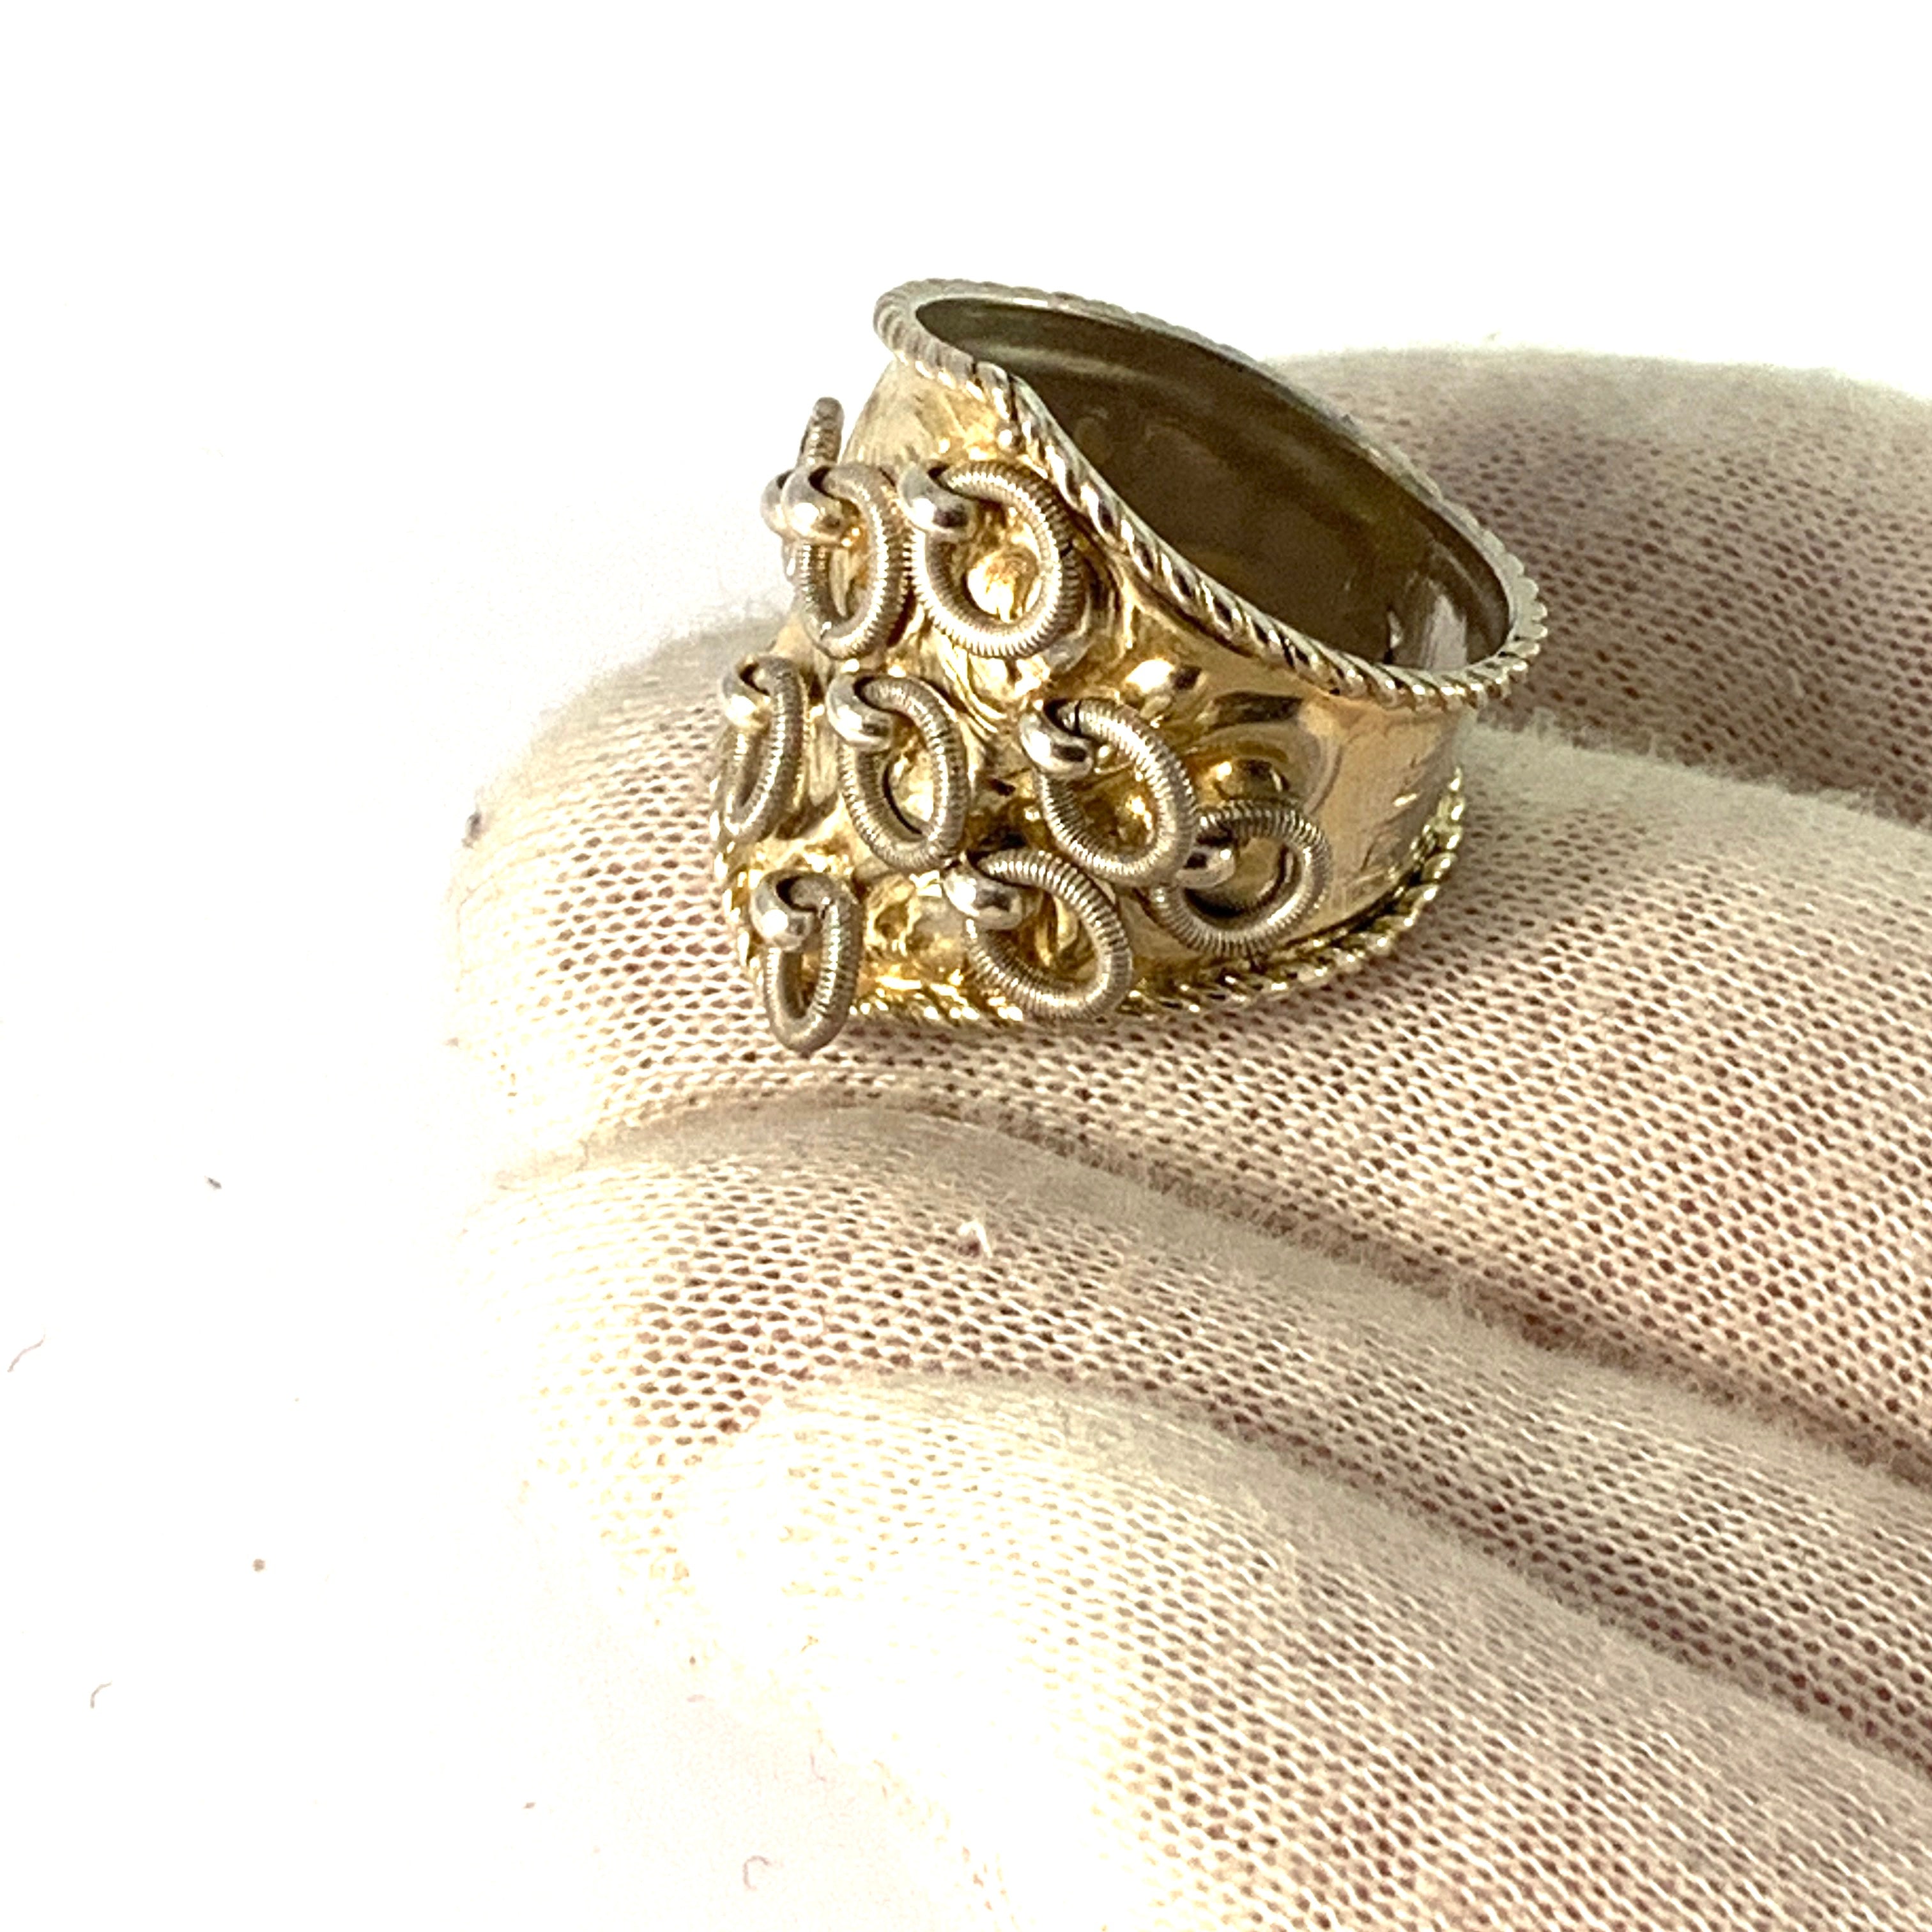 North Sweden year 1879. Antique Solid Silver Traditional Sami Laplander Ring.